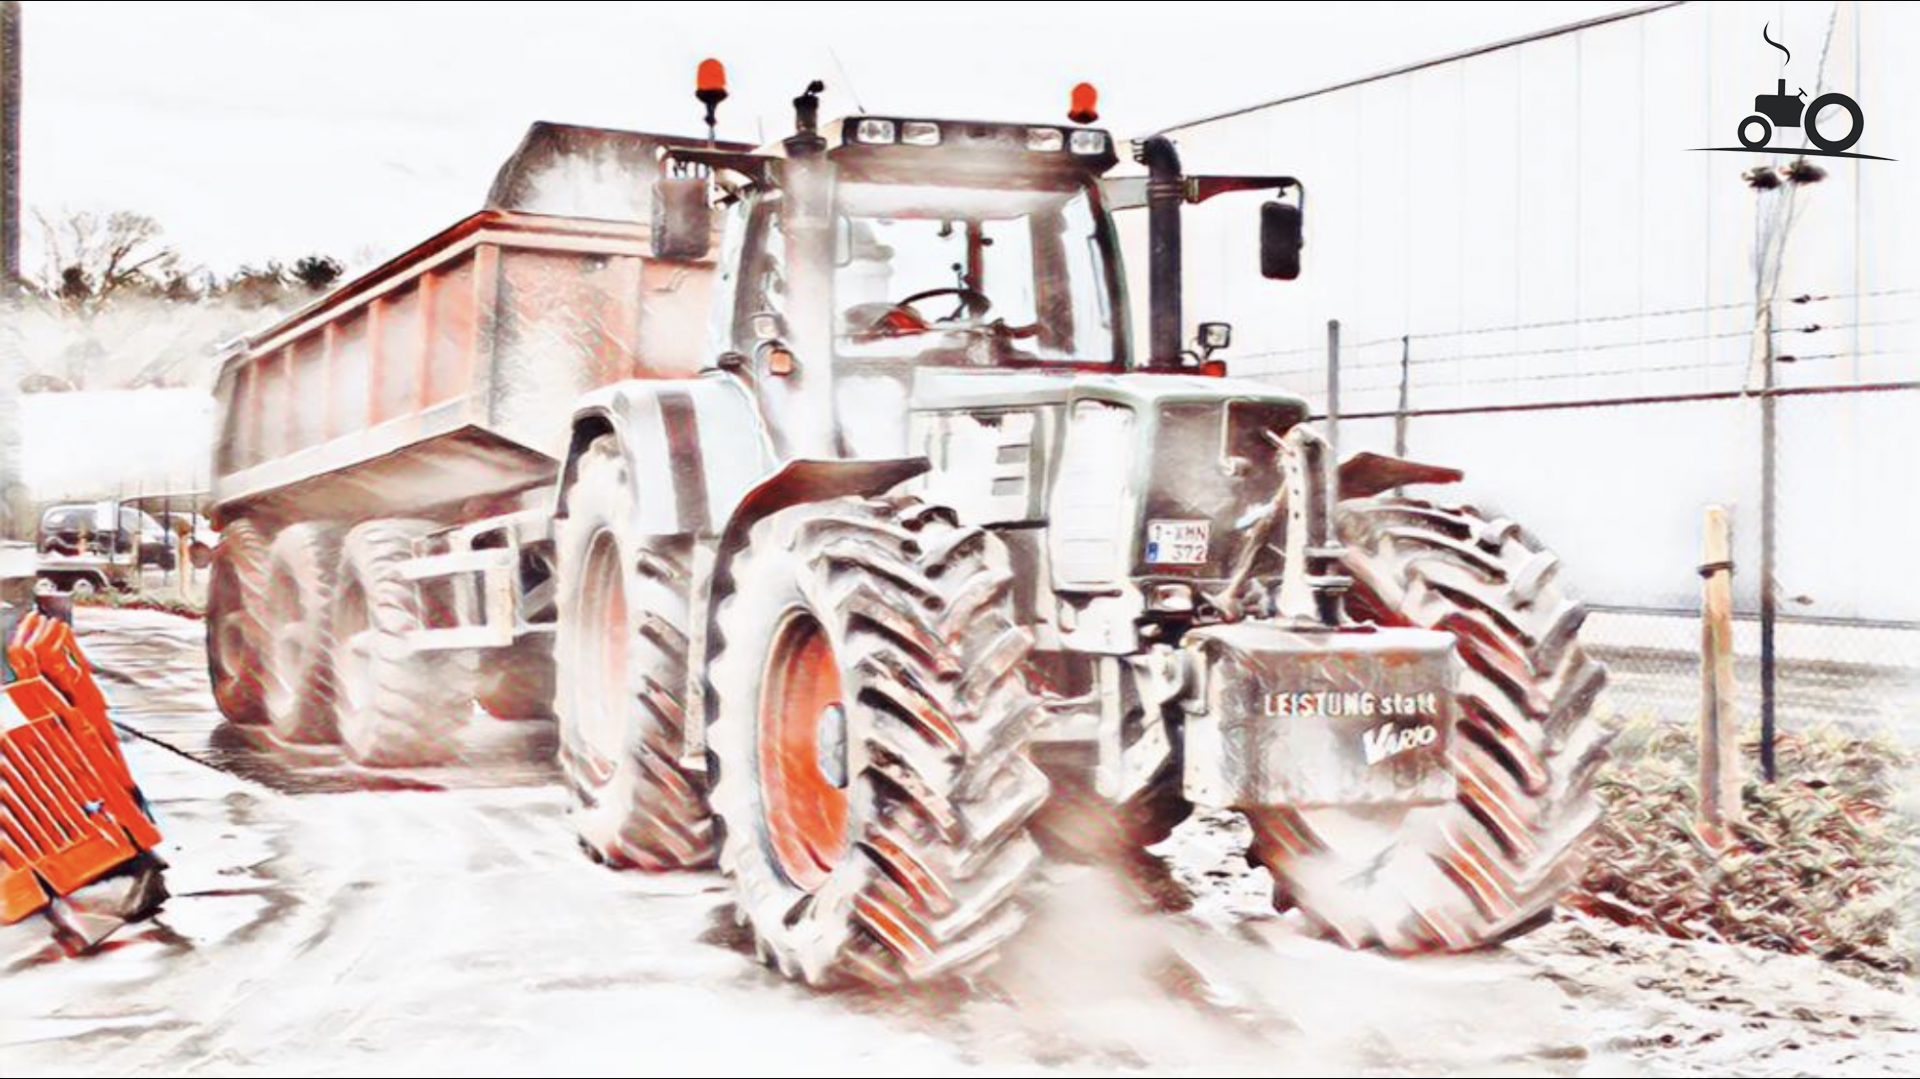 Kleurplaat Fendt Sketch Heavy Snowfall Of Neon Color Weather Conditions Stock Illustration Illustration Of Liner Gift 195920180 Fendt Connect Information Wherever And Whenever You Need It Kumpulan Alamat Grapari